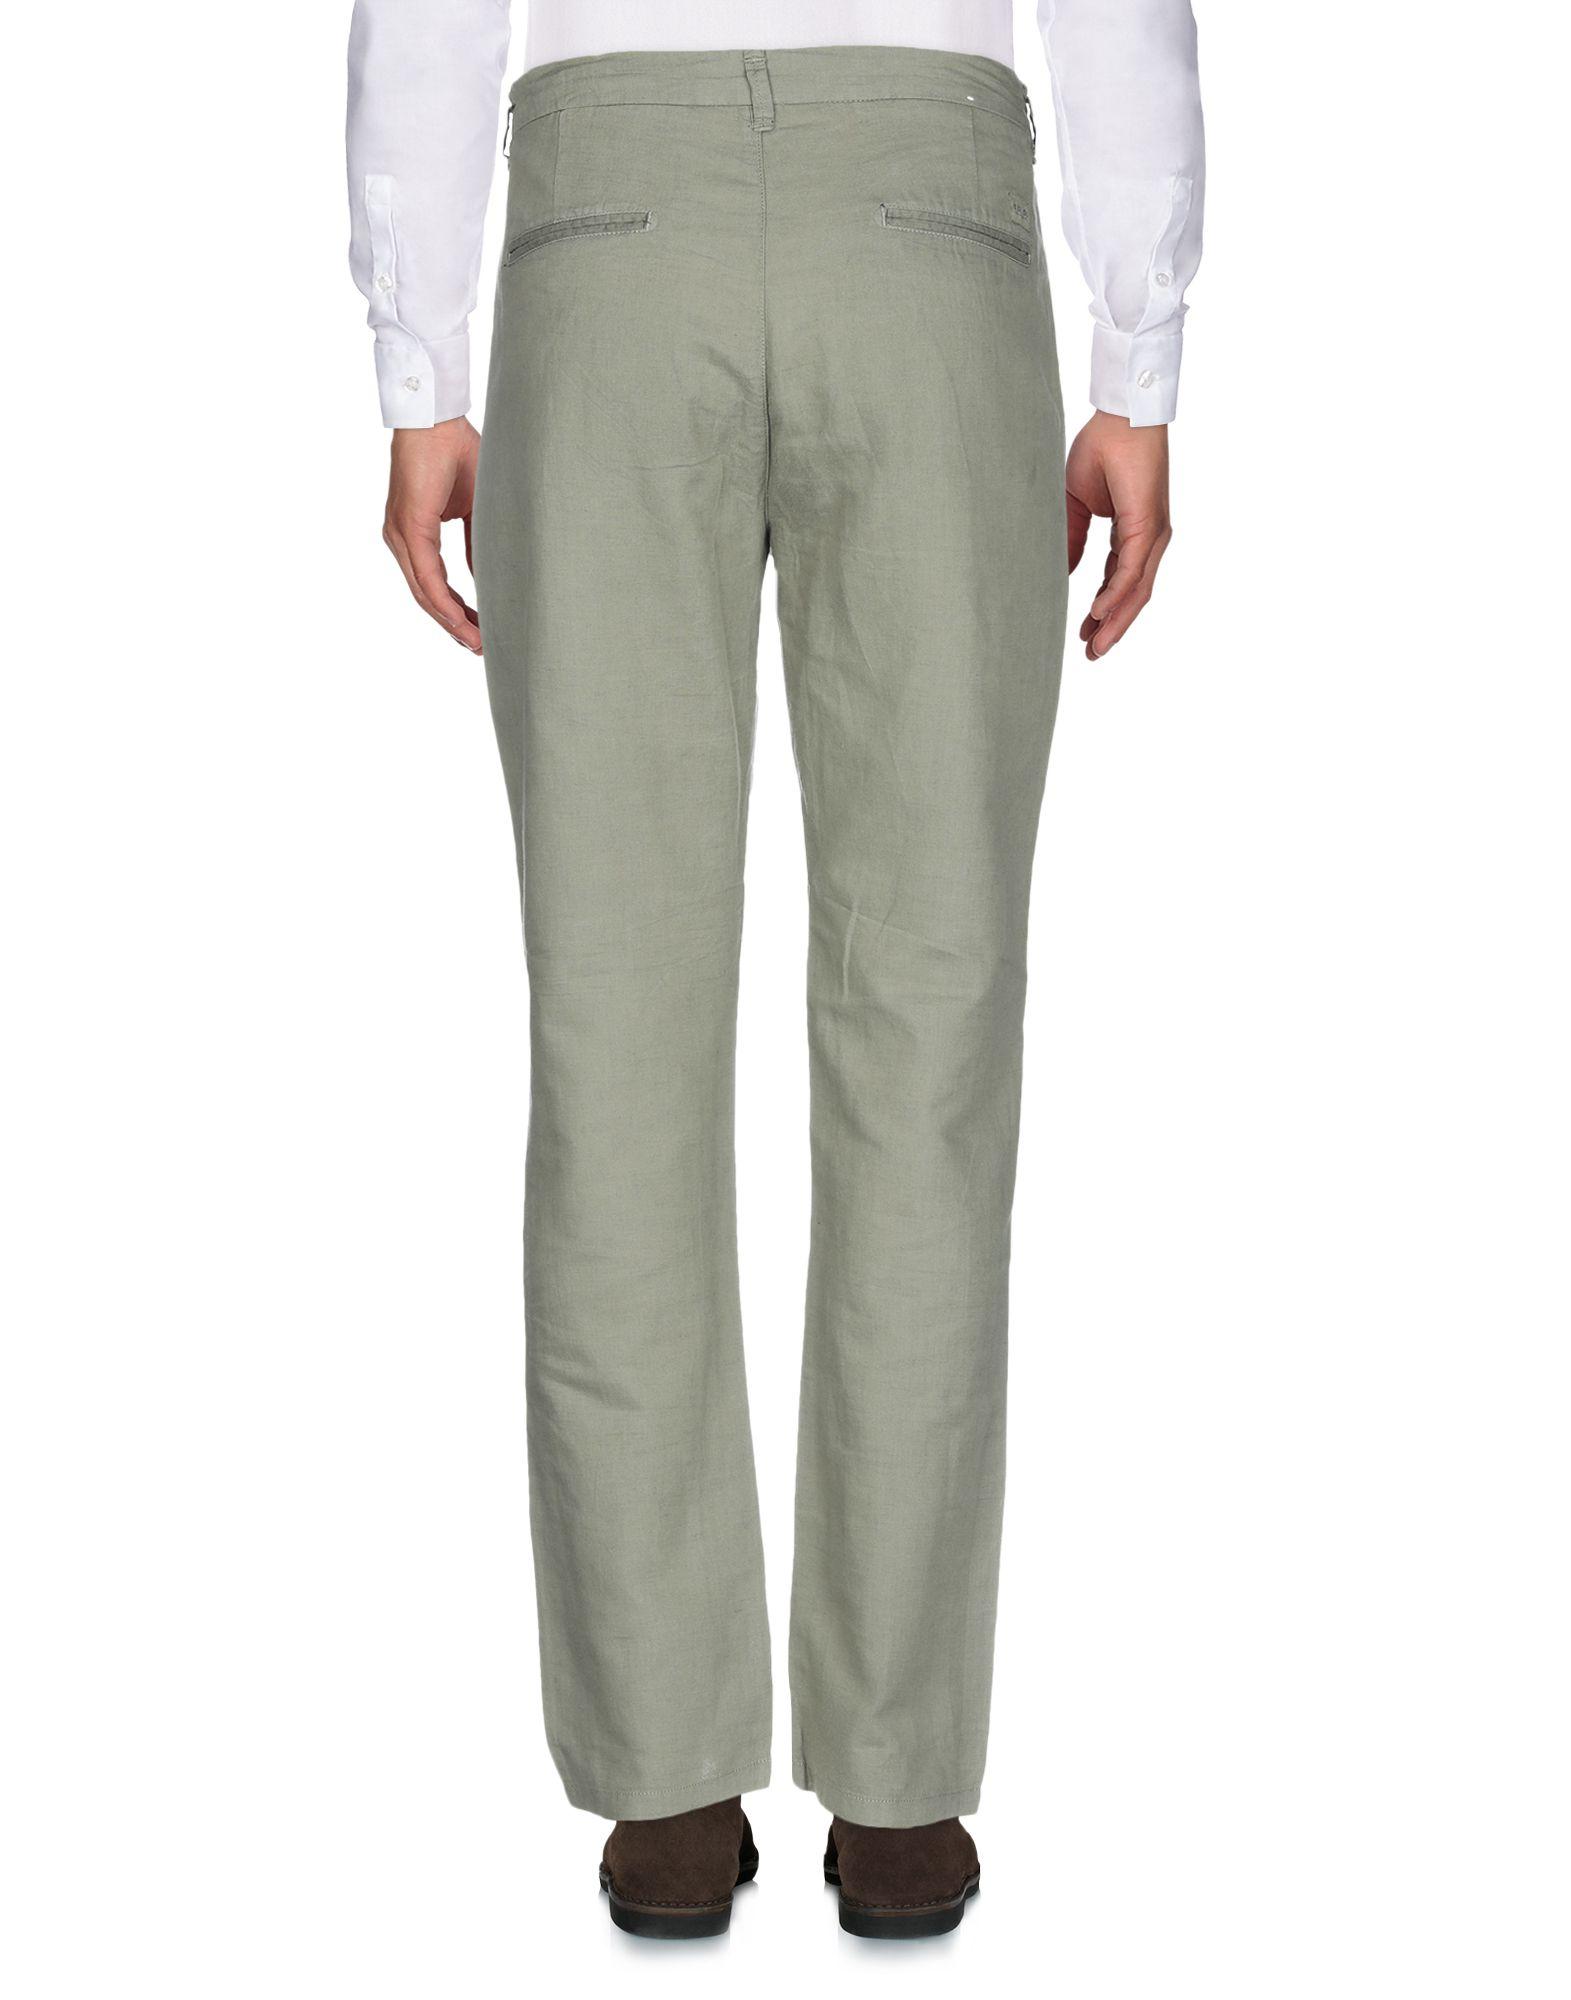 Guess Cotton Casual Pants in Military Green (Green) for Men - Lyst